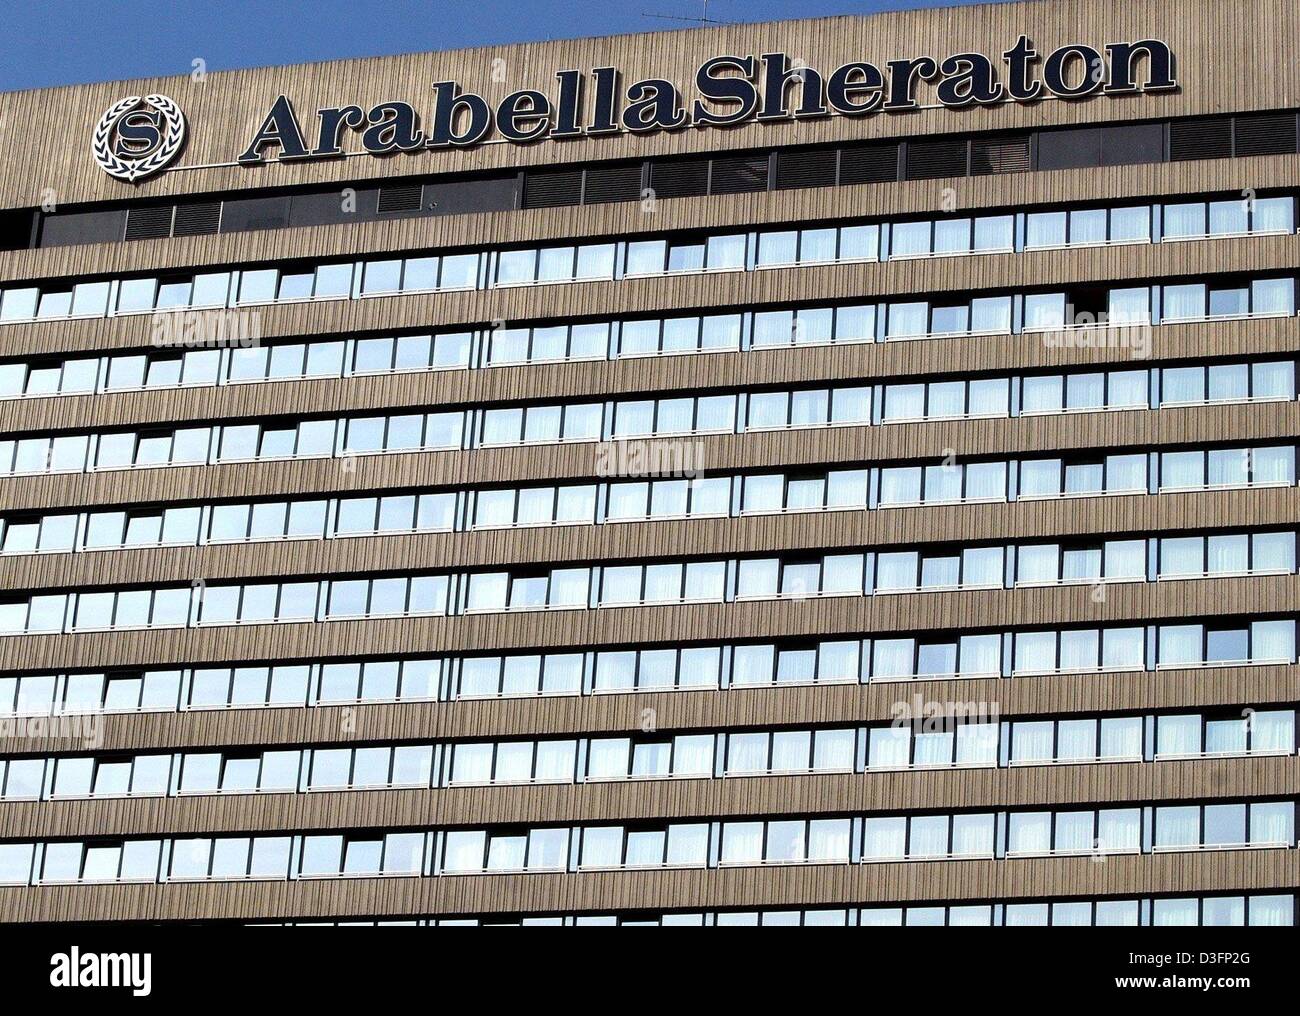 (dpa) - A view of the facade of the Arabella Sheraton Hotel in Munich, Germany, 27 March 2003. Selva, the largest Italian exporter of furniture, bought the German Bachuber group, a company from Passau, Germany, which has specialised in the design, building and installation of furniture and interior decoration for commercial clients, such as hotels and restaurants. Selva wants to ex Stock Photo